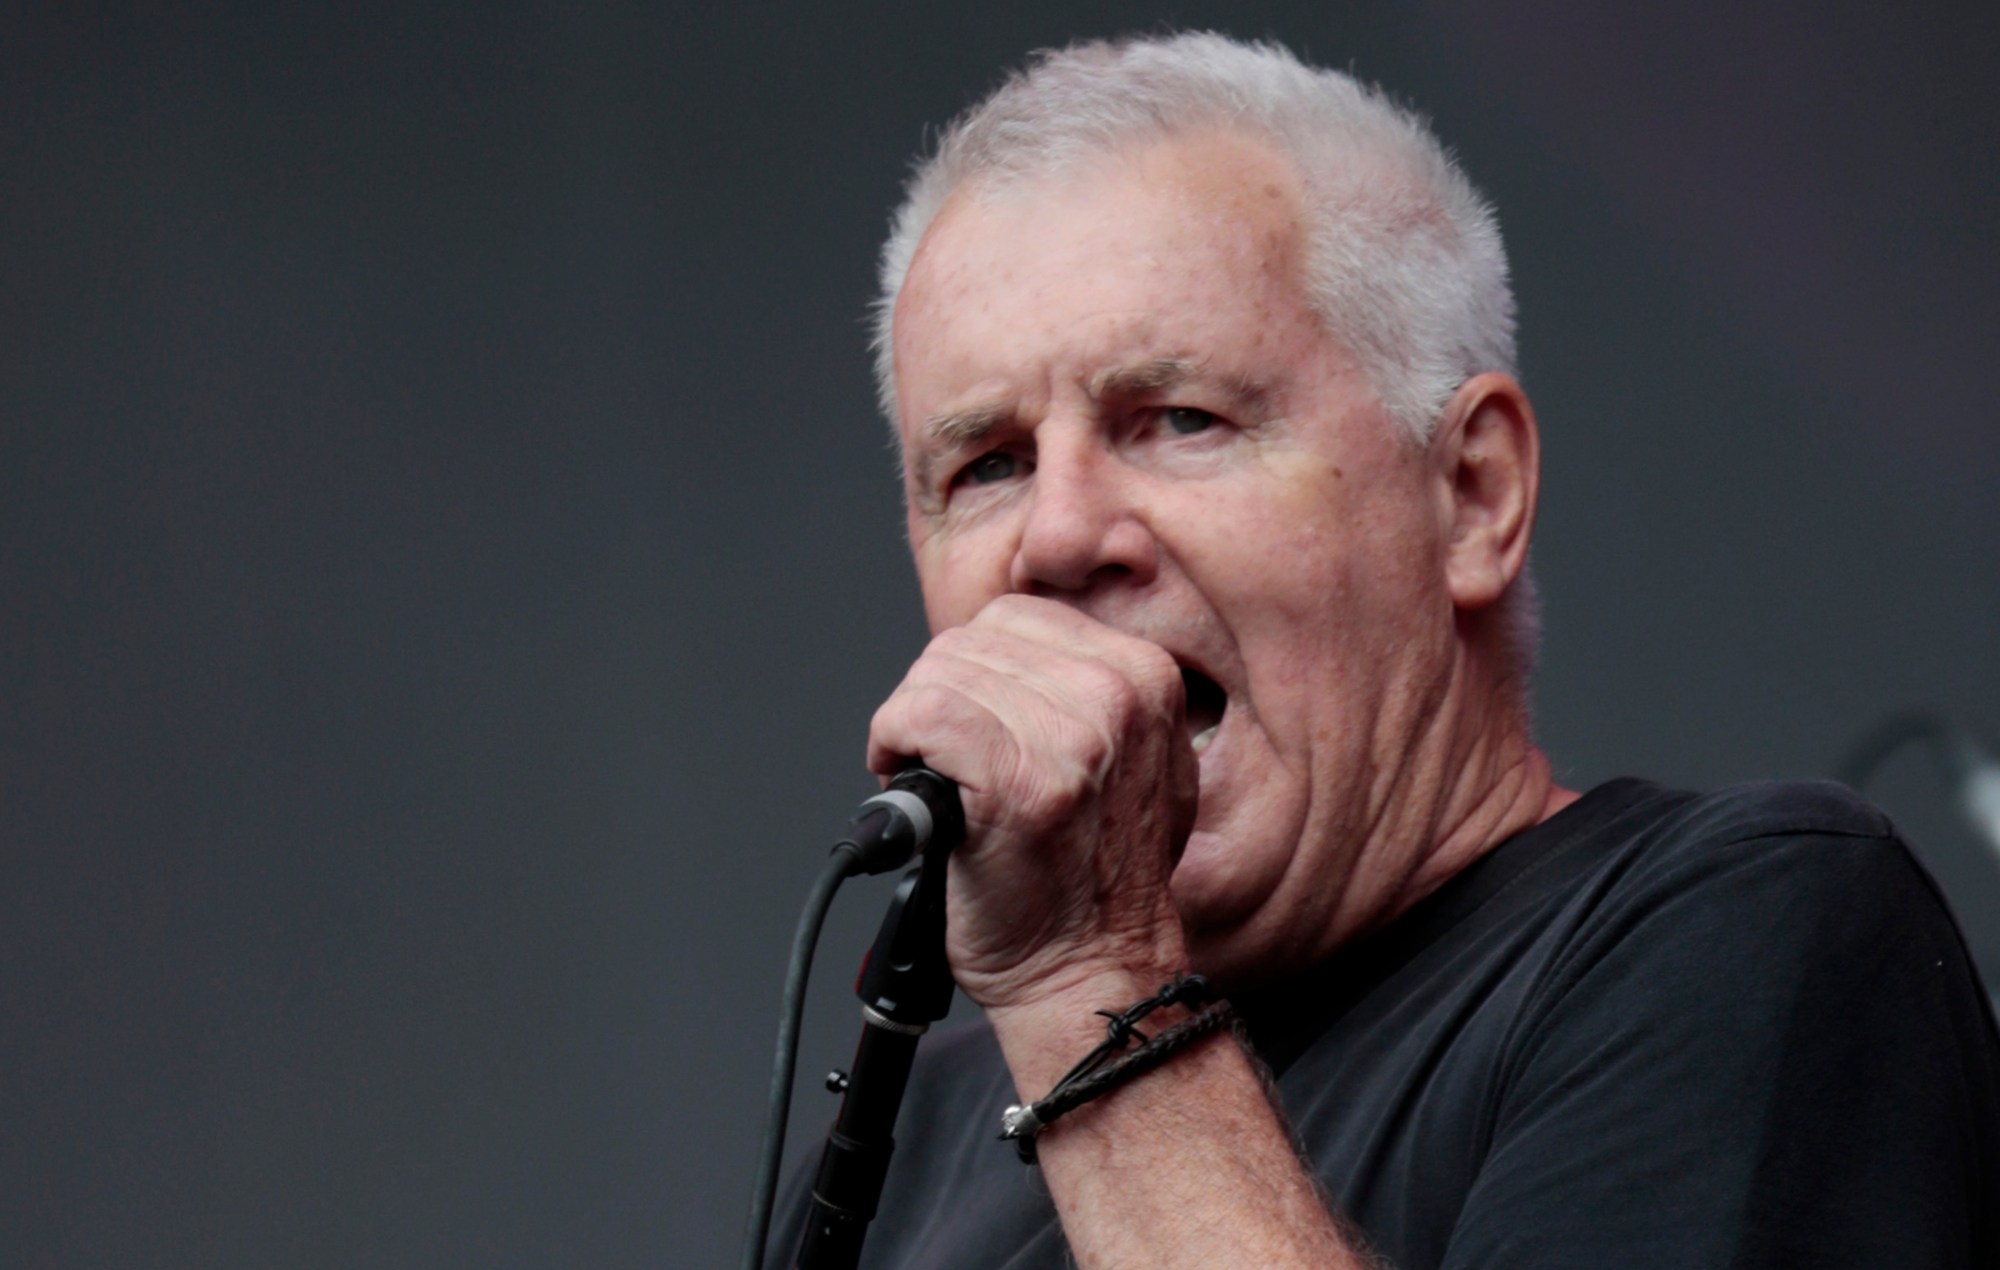 Aussie rock legend hospitalised on 30th anniversary of iconic song.